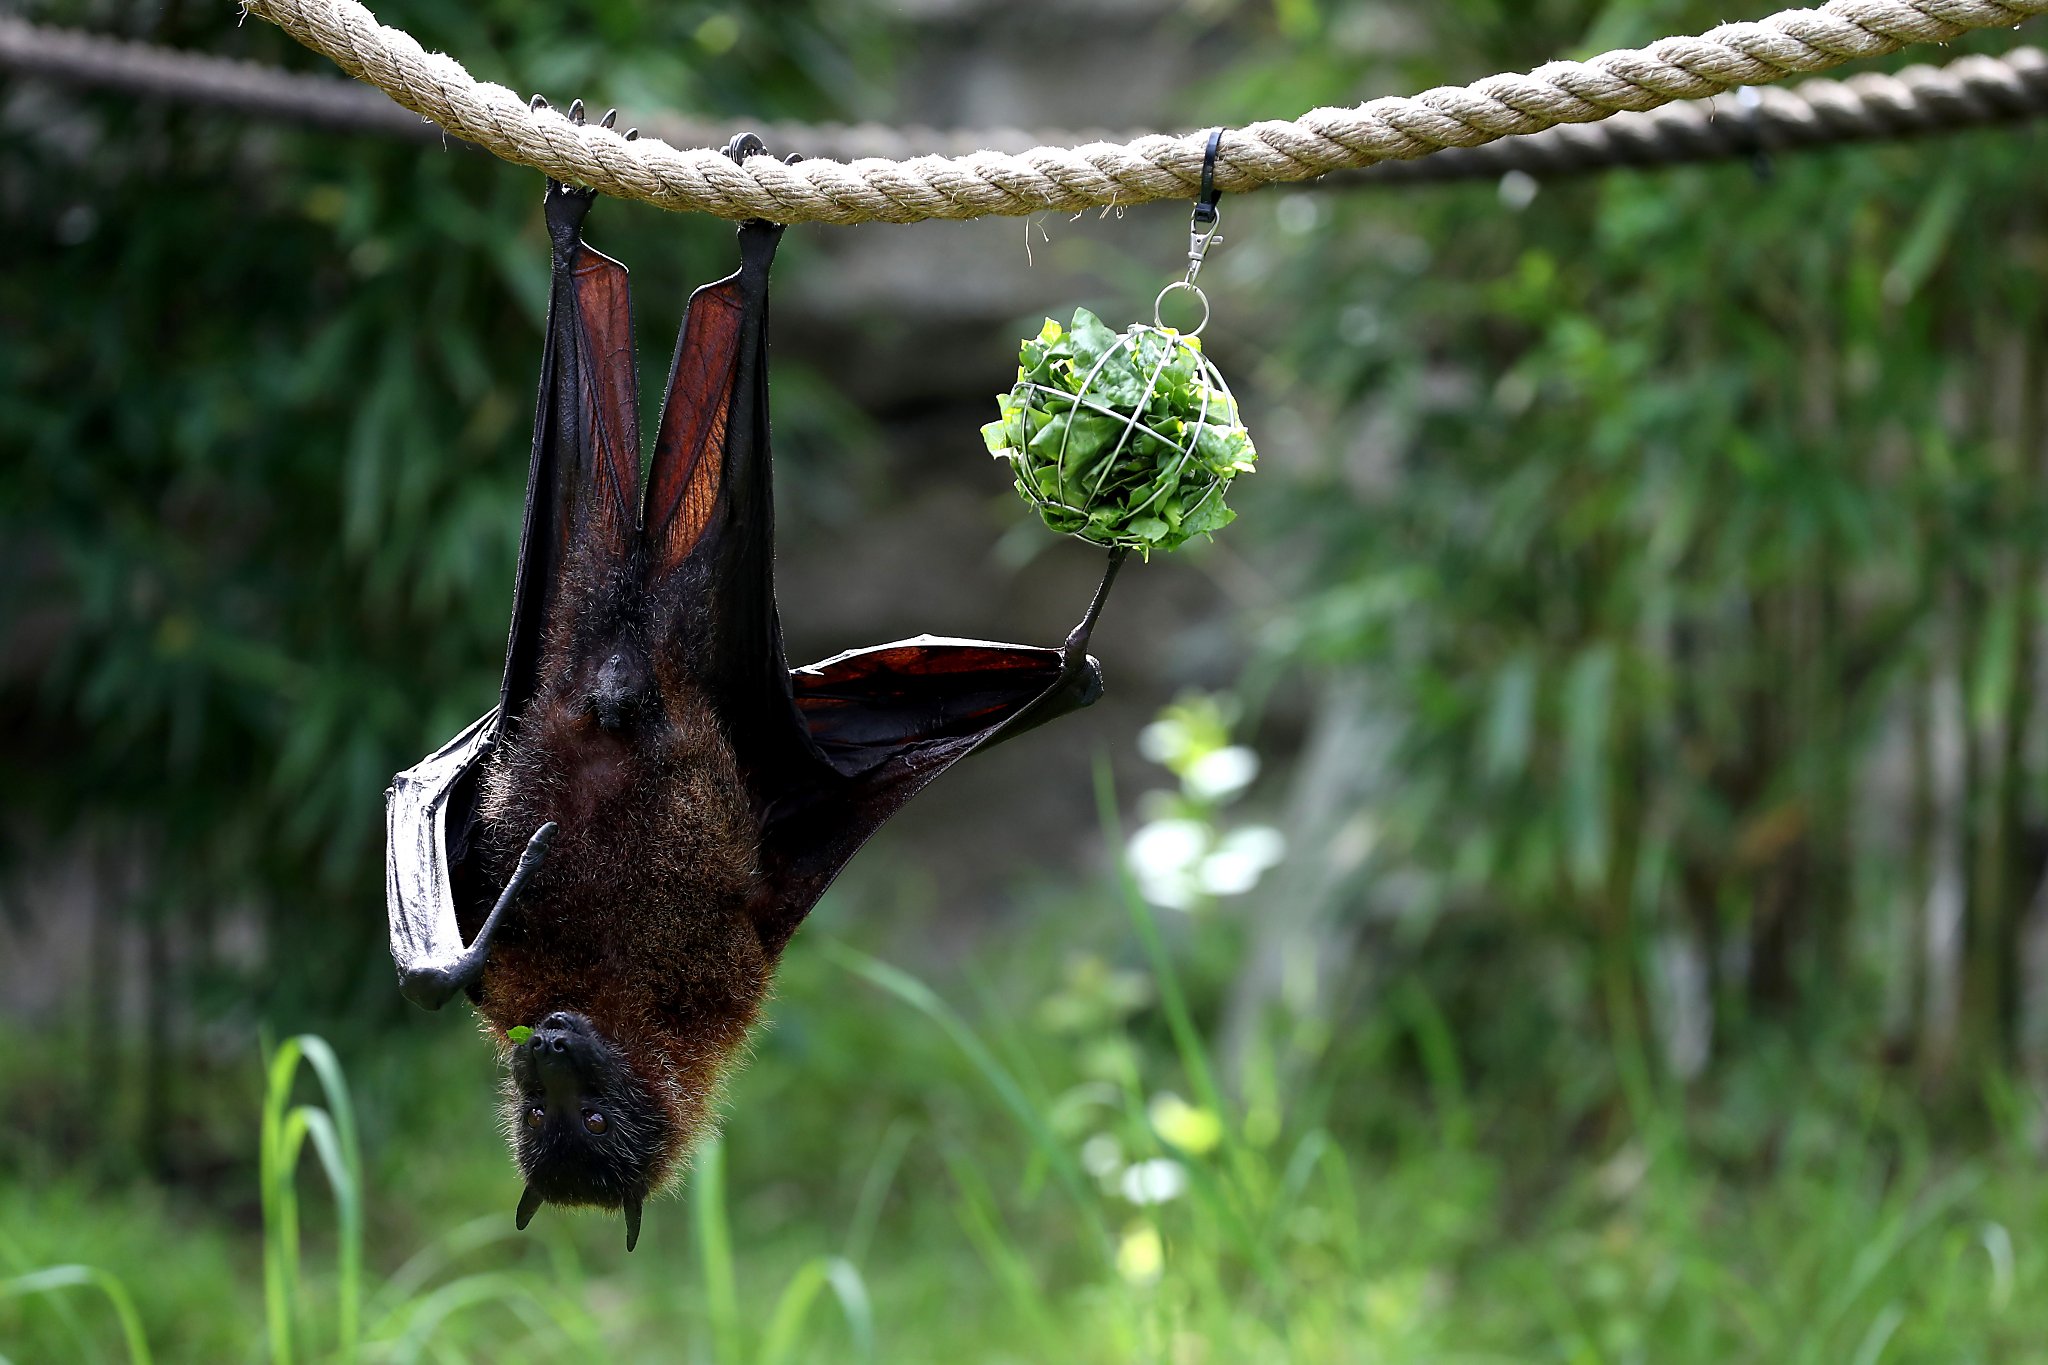 A fruit bat eats lettuce as it hangs from a rope on April 16, 2020 in Oakland, California. BatsBats may be where the coronavirus began. Some scientists believe the virus fermented in bat populations, was passed on to pangolins and then to humans. So, of course some people are going on what the National Resource Defence Council called